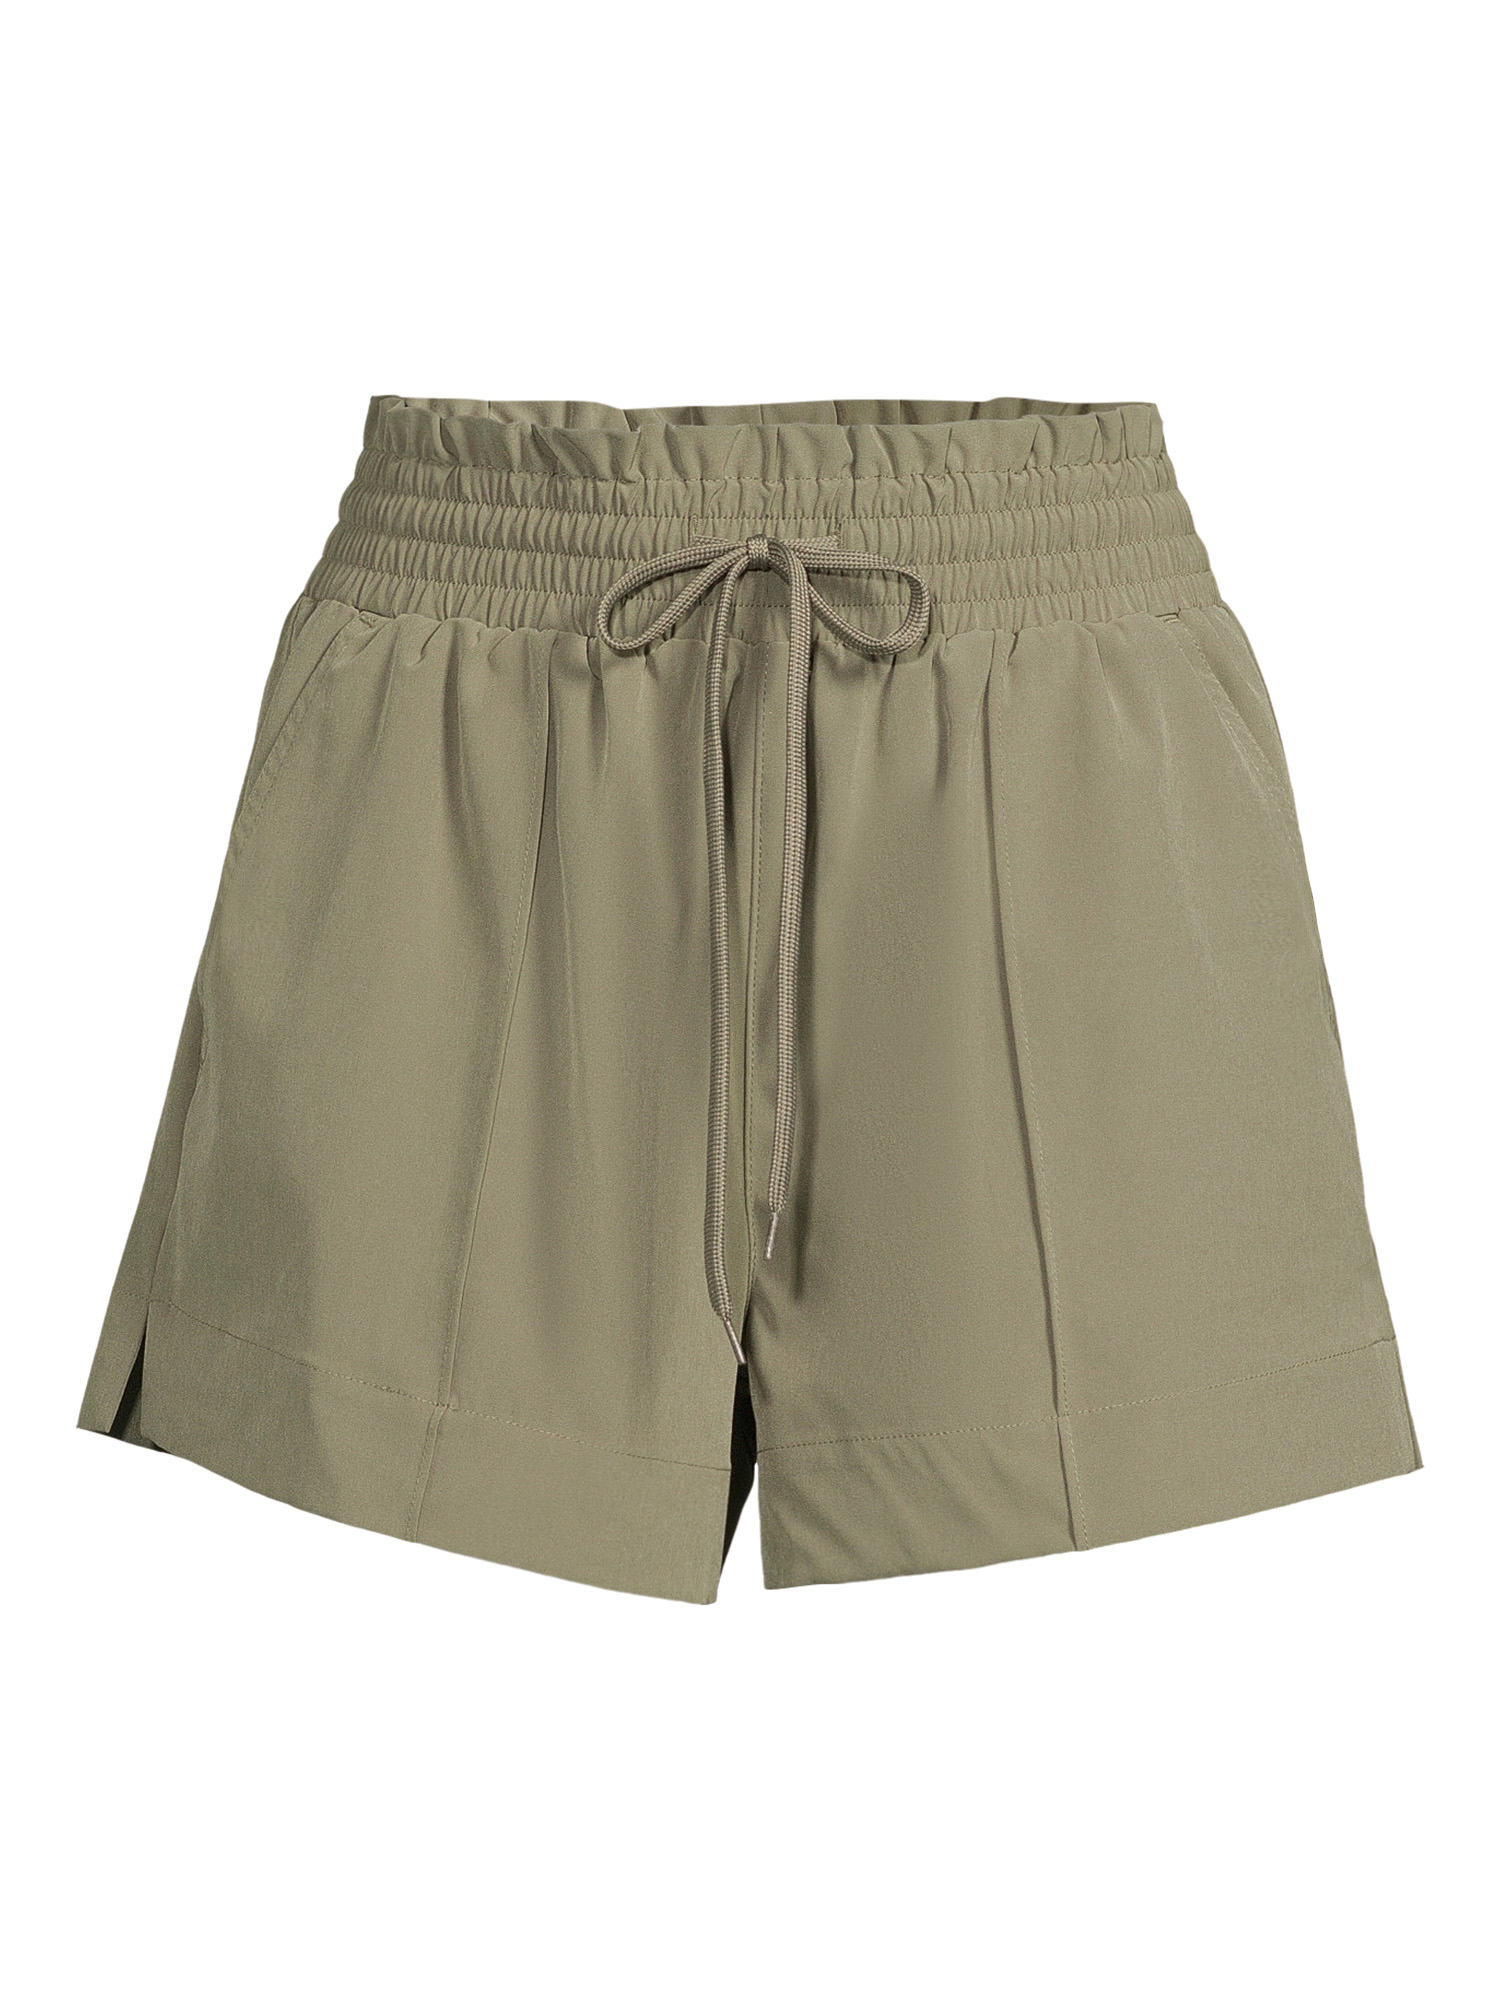 No Boundaries Juniors Seamed Stretch Shorts, Sizes XS-3XL - image 5 of 5